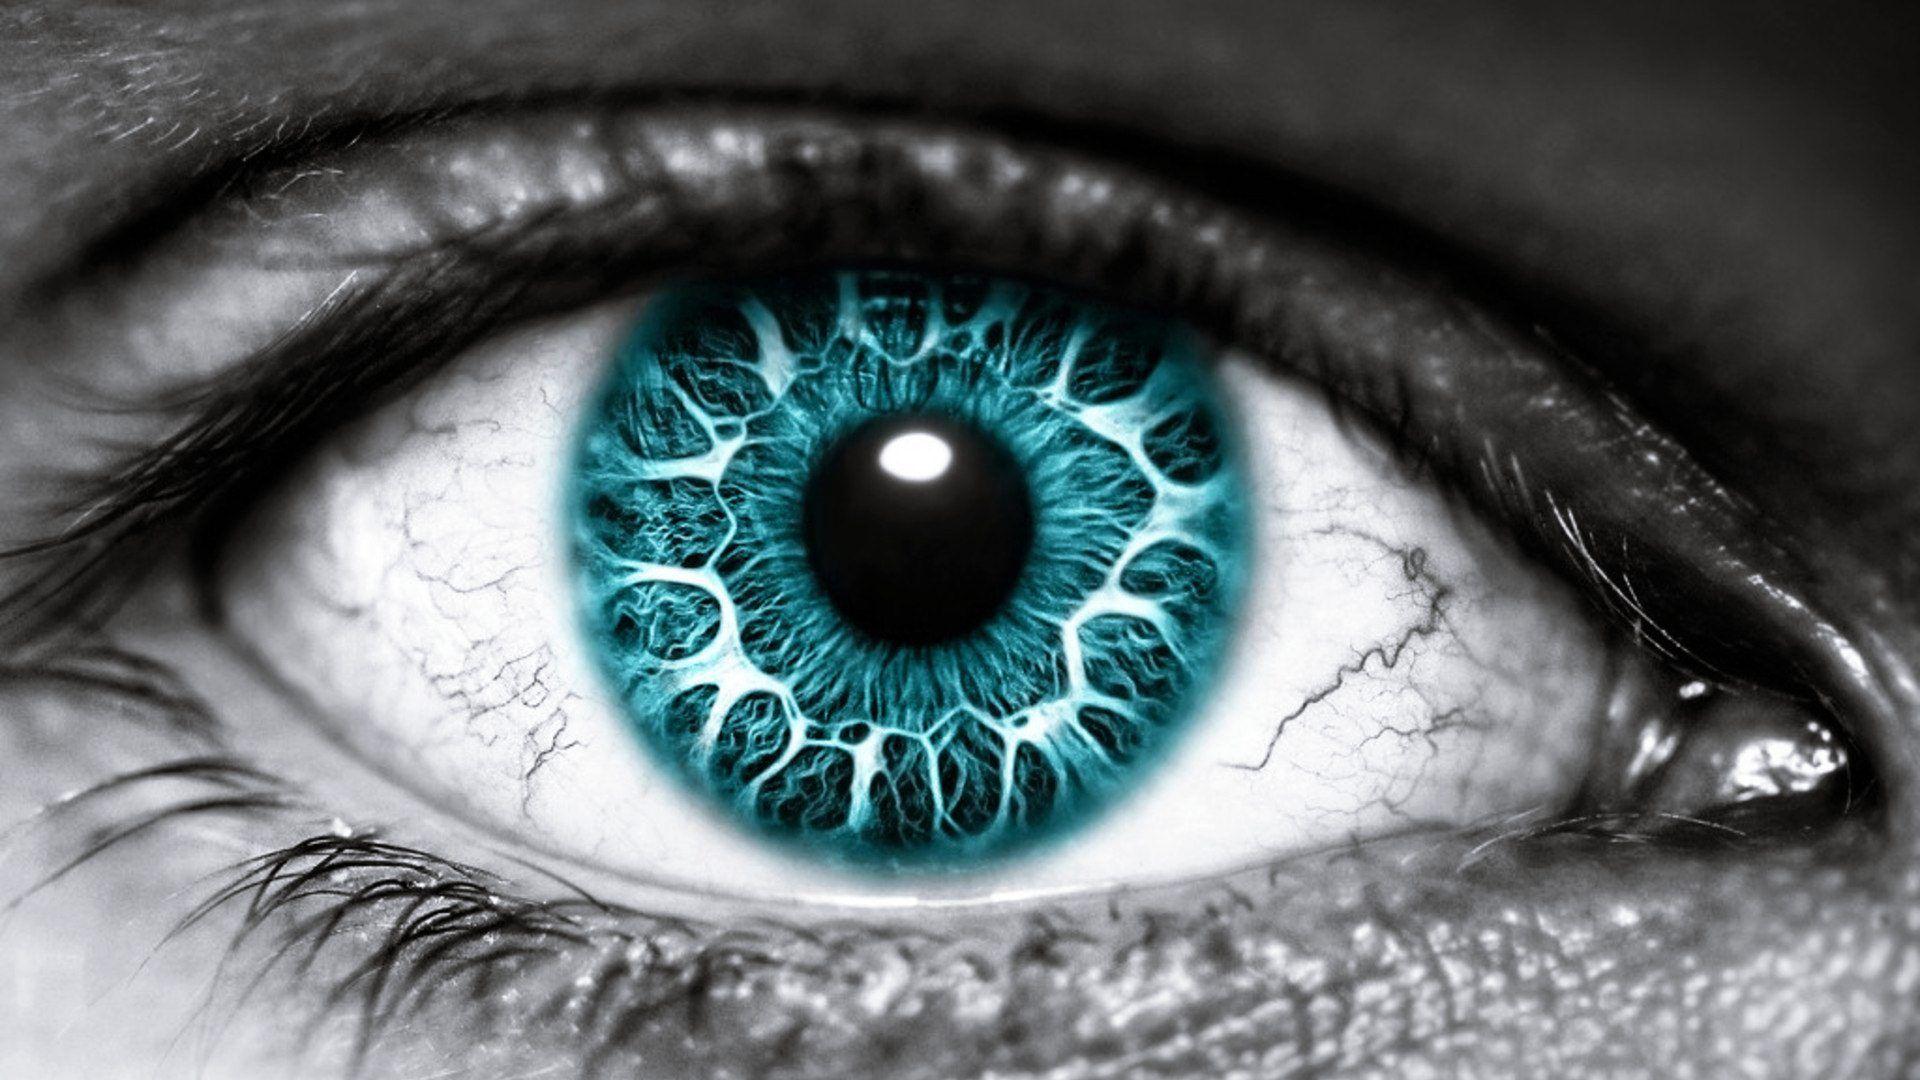 Abstract Eyes Wallpaper Free Hd For Desktop